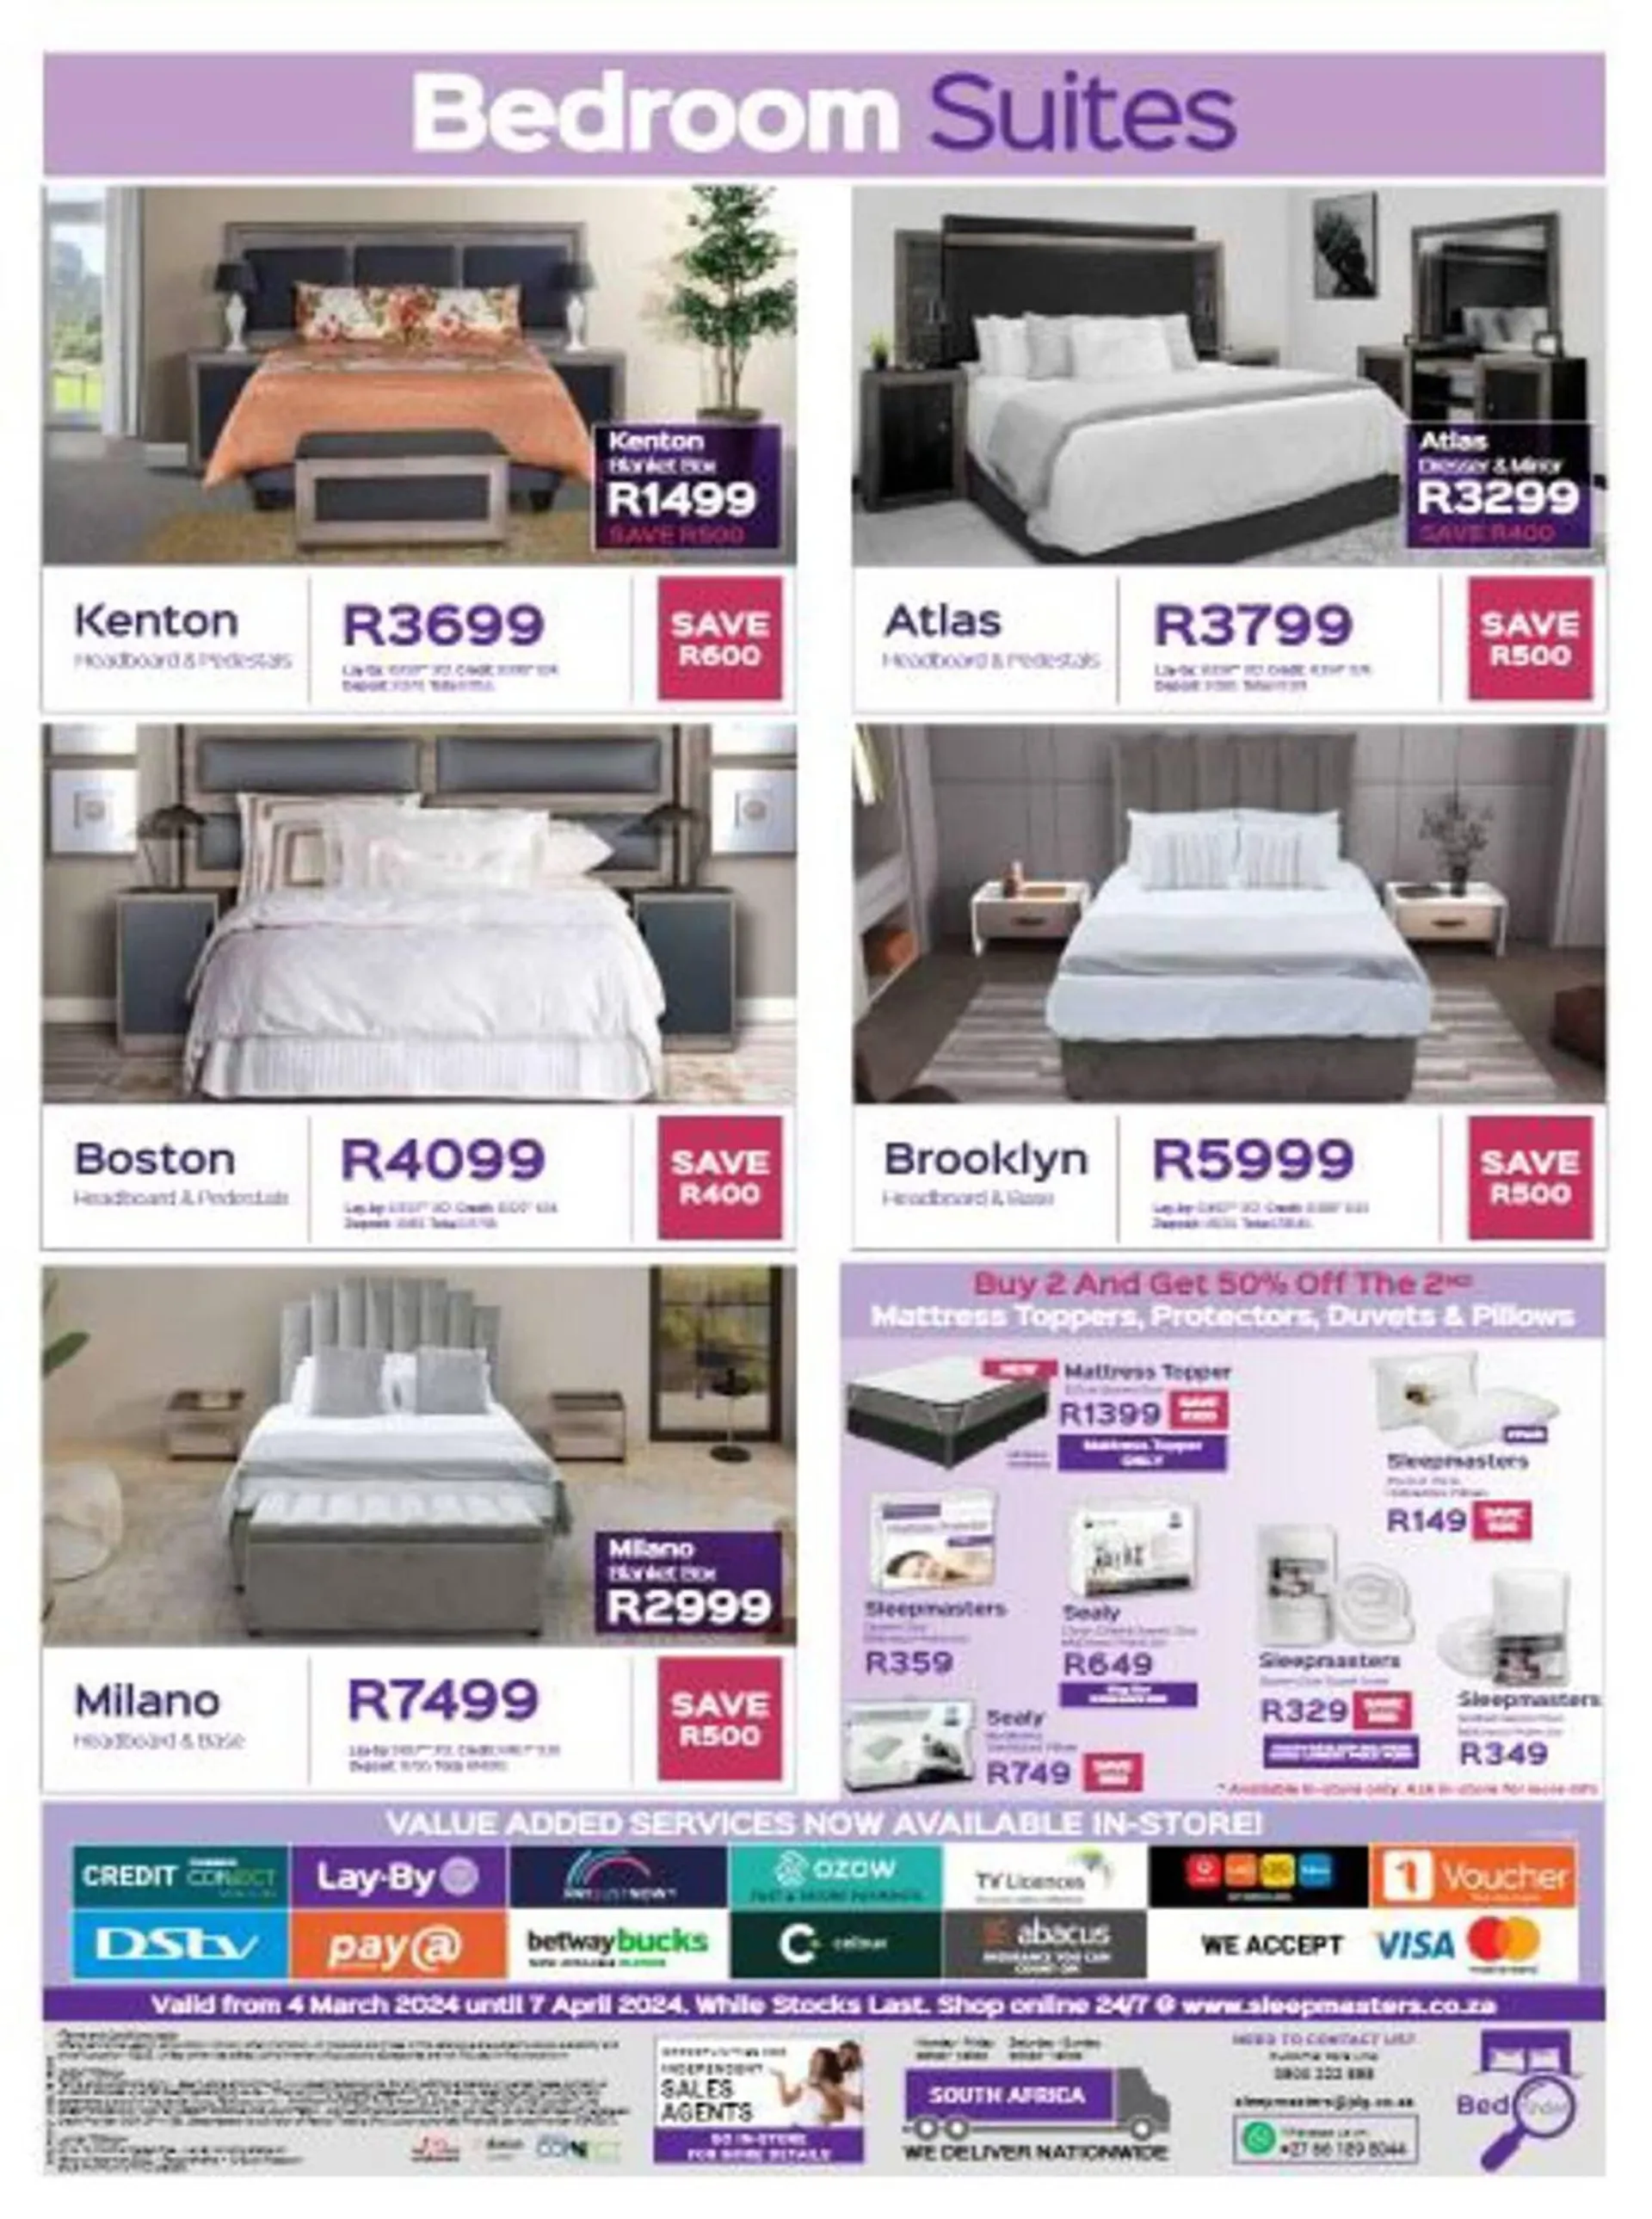 Sleepmasters catalogue - 8 March 7 April 2024 - Page 8